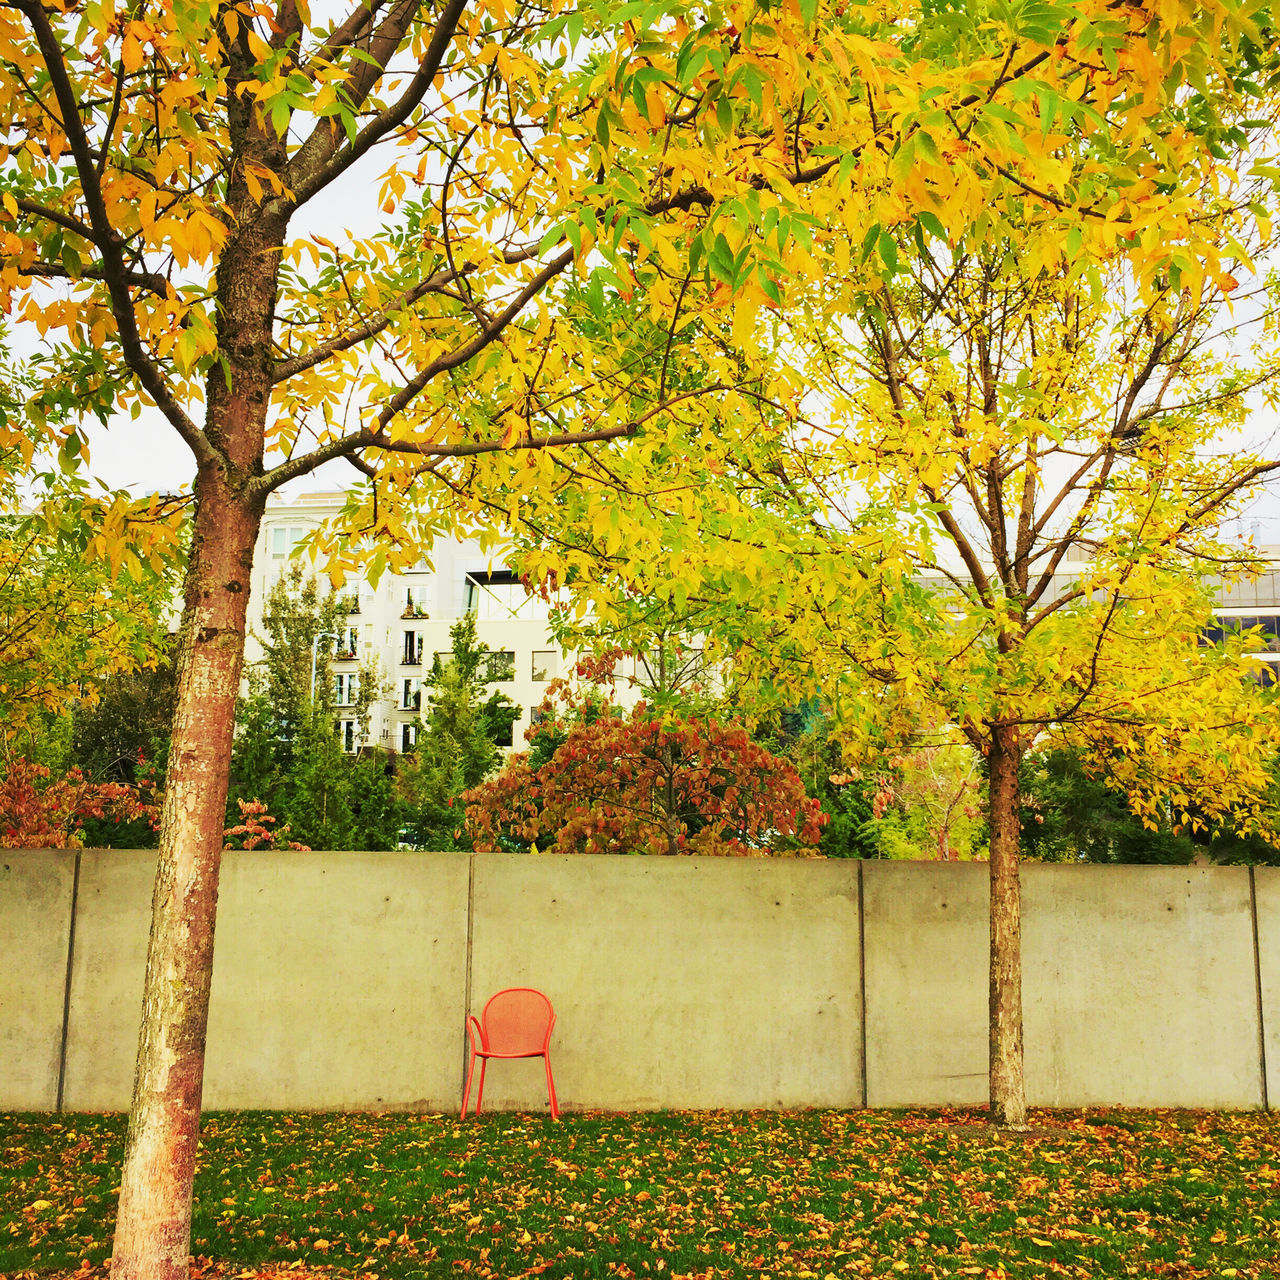 tree, autumn, yellow, change, growth, branch, leaf, season, built structure, building exterior, nature, plant, architecture, beauty in nature, flower, park - man made space, day, outdoors, fence, green color